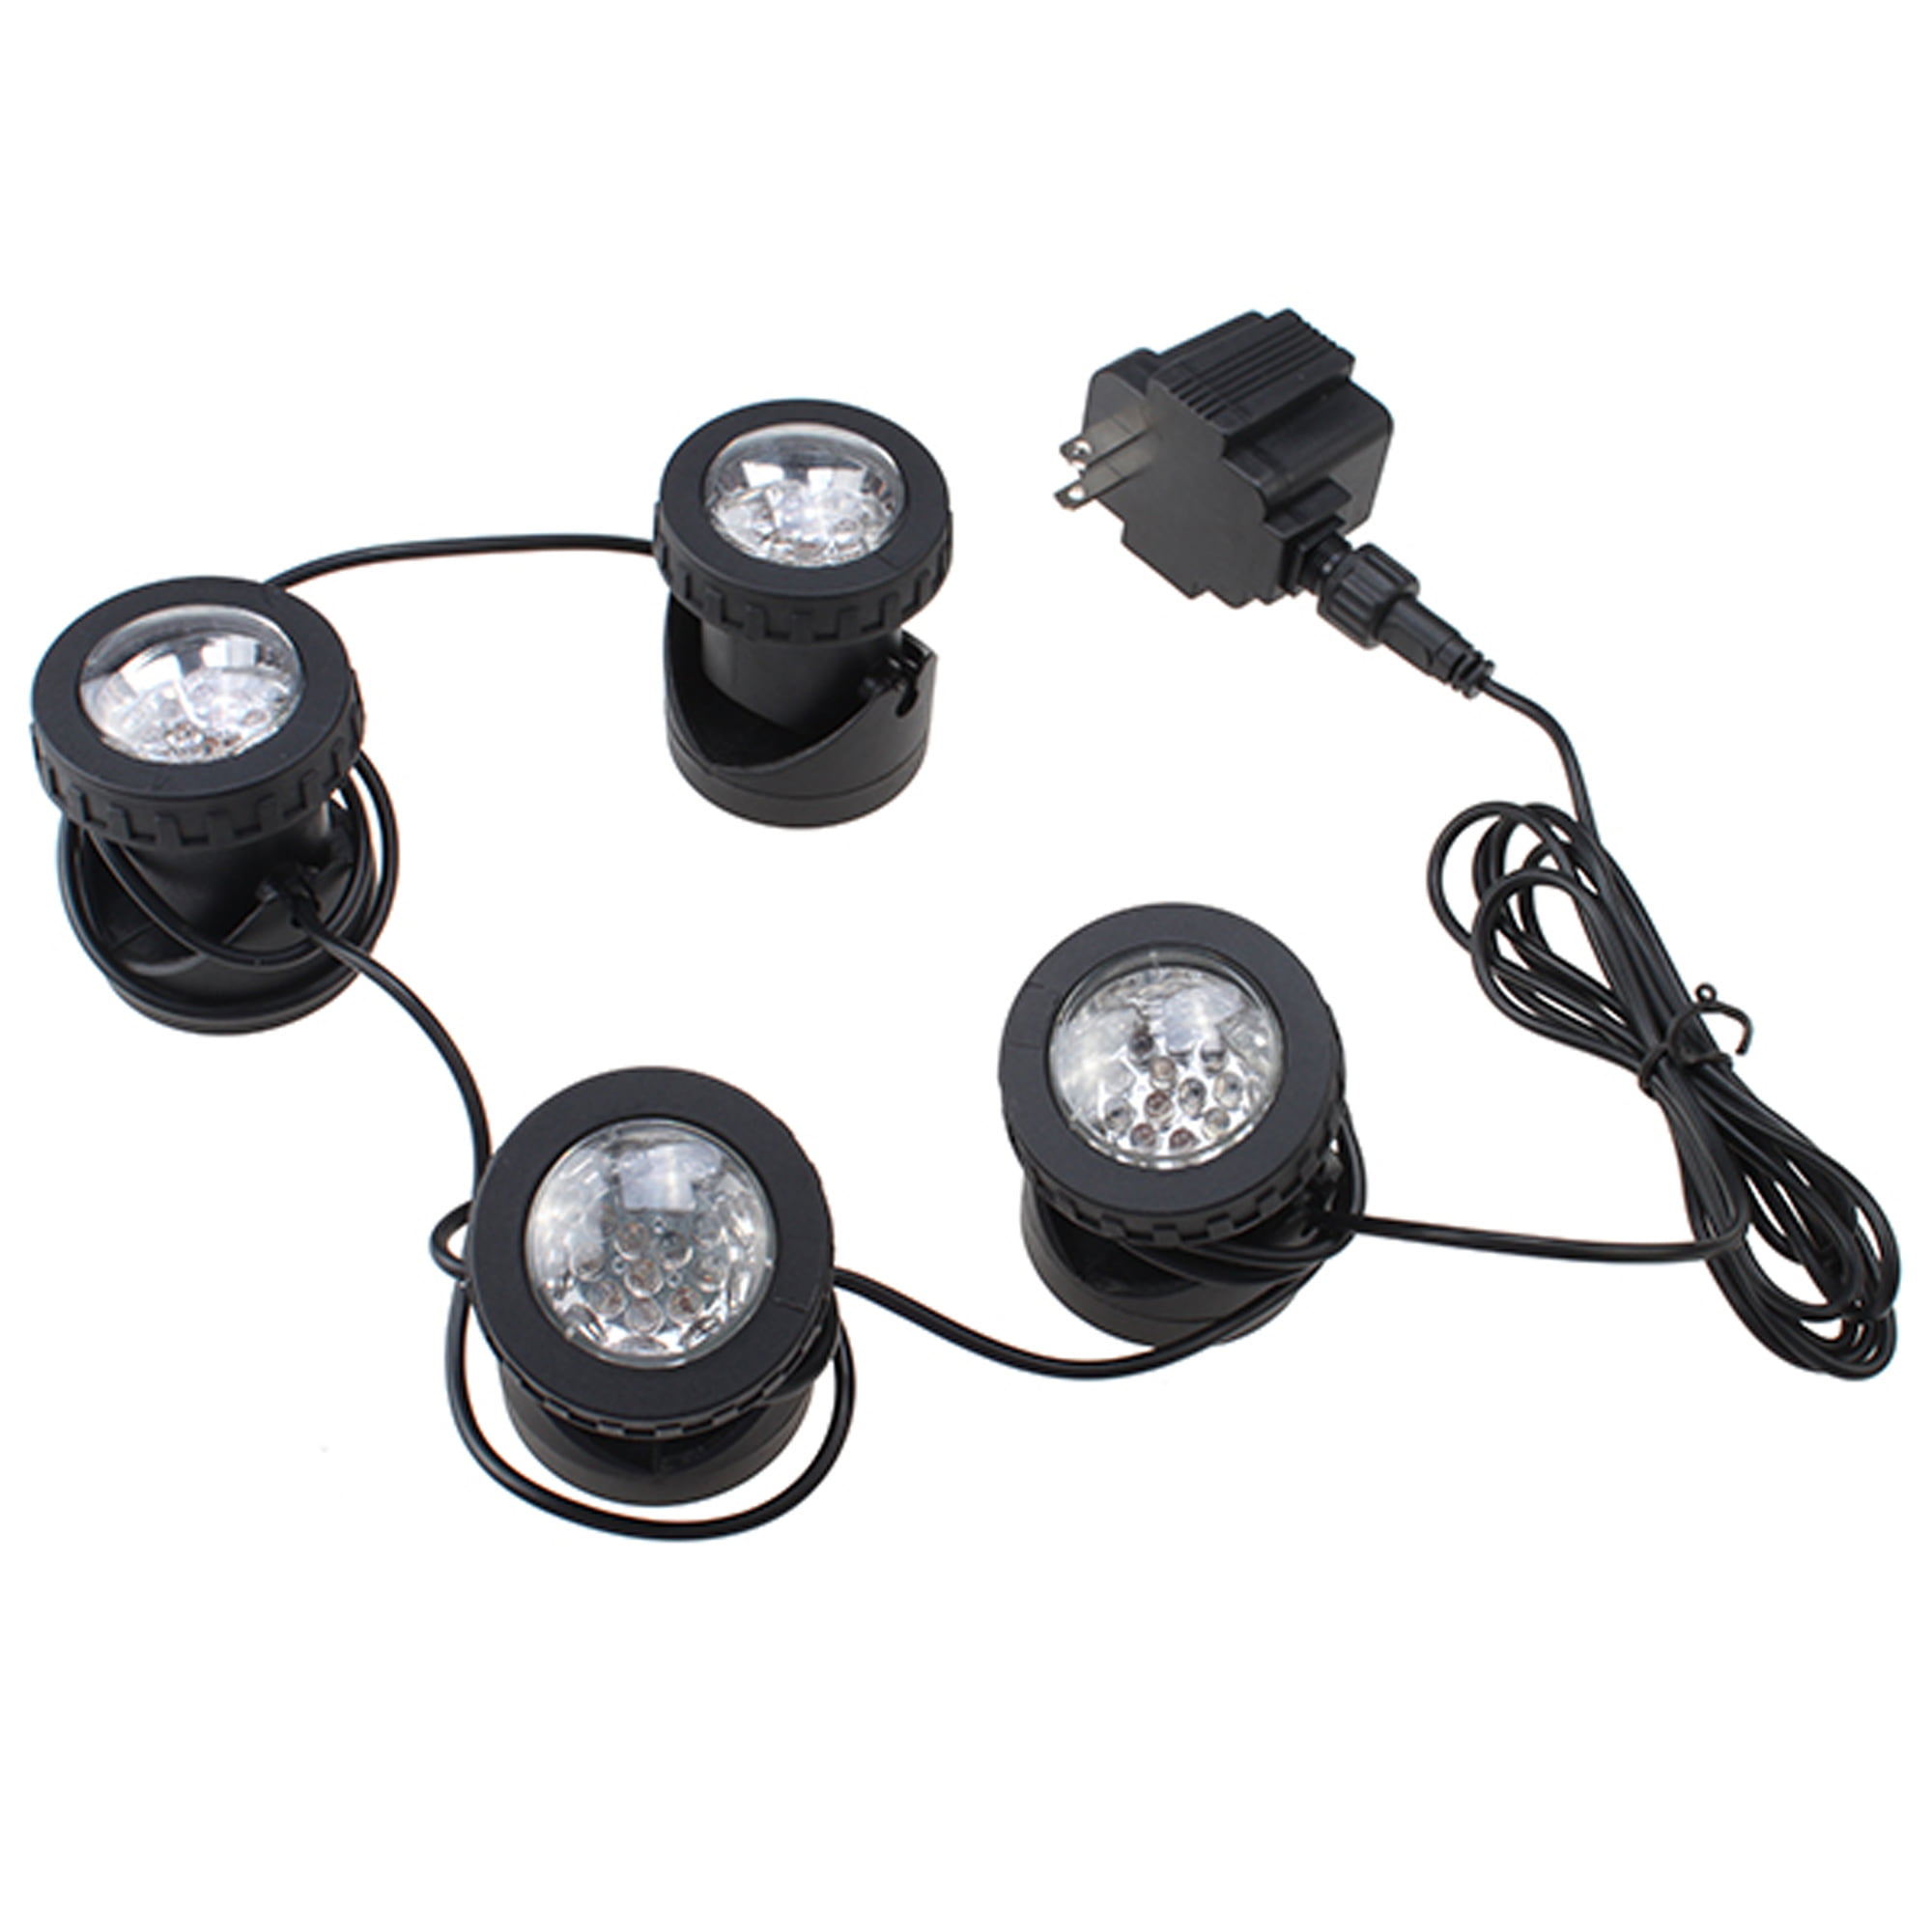 SUBMERSIBLE 4 LED POND LIGHT SET FOR UNDERWATER FOUNTAIN FISH POND WATER GARDEN 